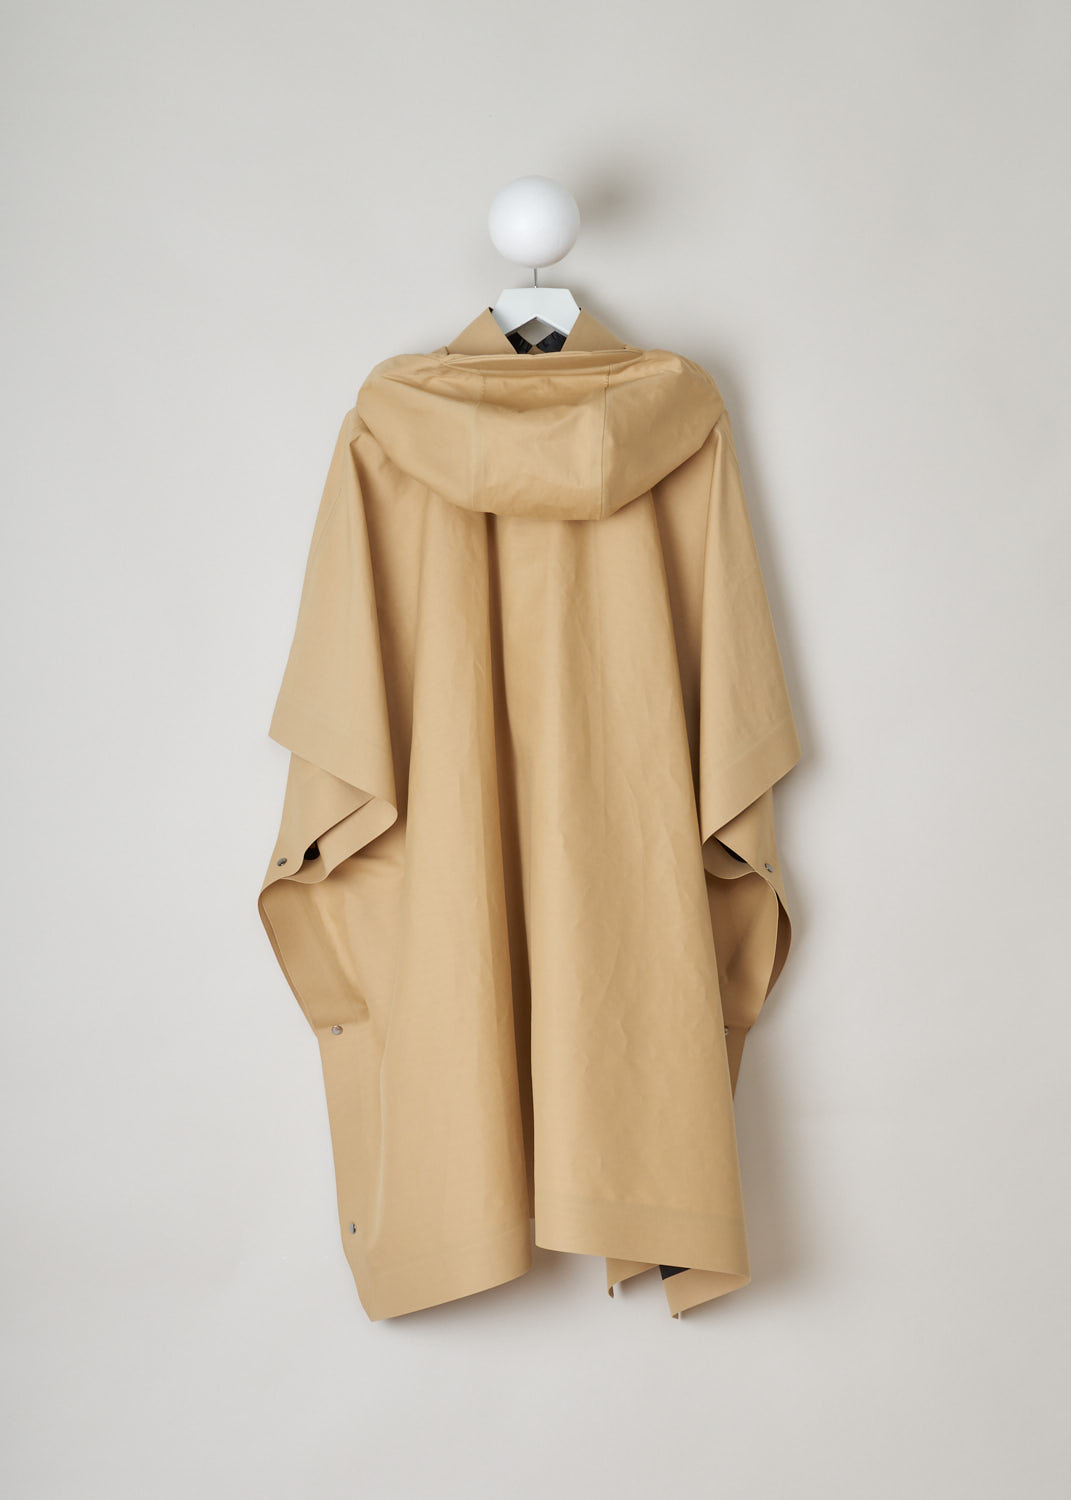 Kassl, Beige trench poncho, poncho_beige_HS21C164070003W, beige, back, Made from a lightweight cotton-blend canvas, featuring a large attached hood with drawstrings and visor. Furthermore this model has high collar and a split-neckline with snap-button fastening, also has snap fastenings at the sides for wind and rain protection